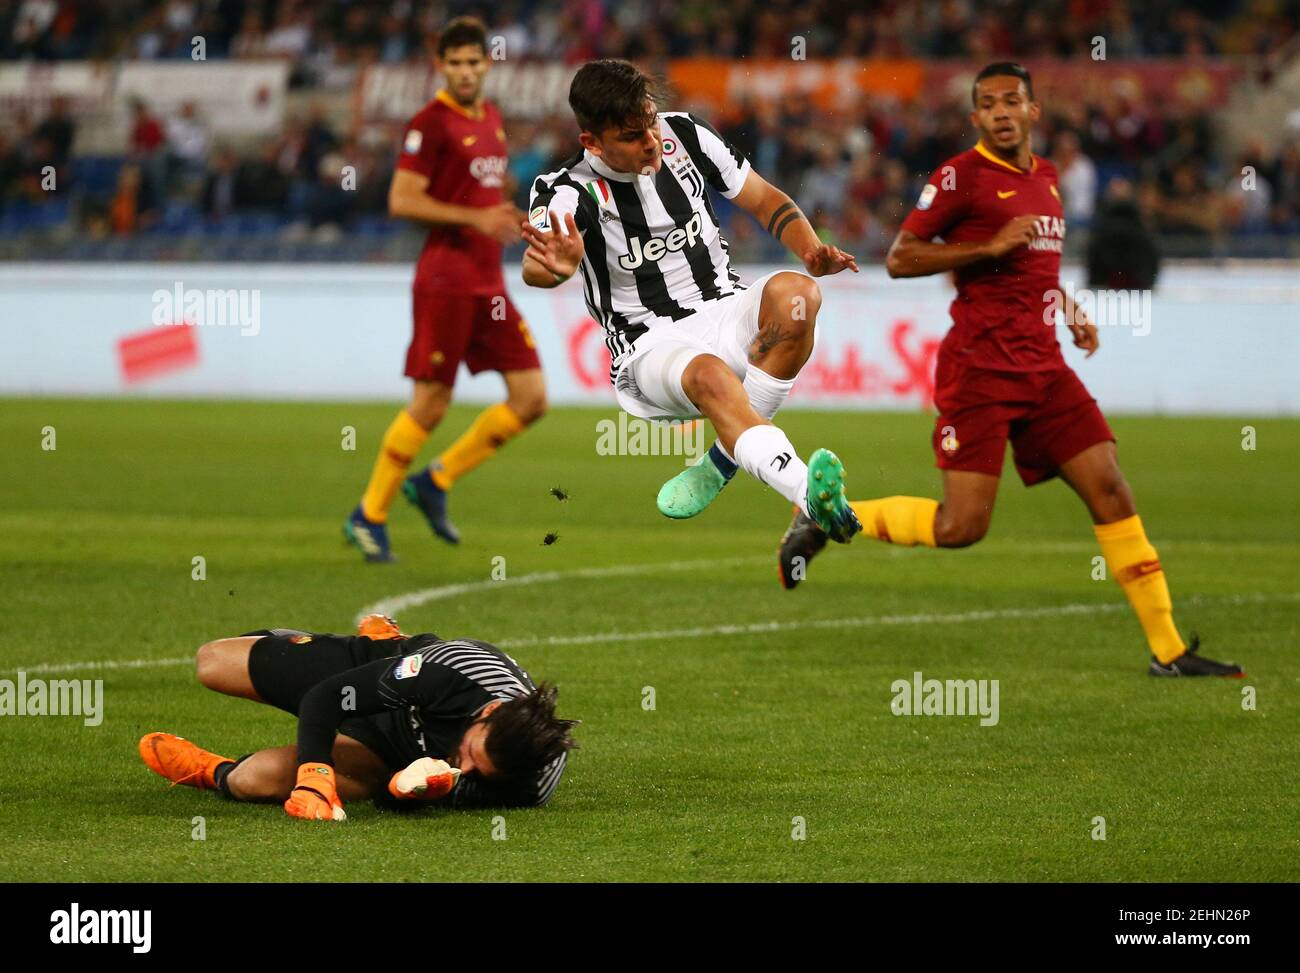 Soccer Football - Serie A - AS Roma vs Juventus - Stadio Olimpico, Rome, Italy - May 13, 2018   Juventus' Paulo Dybala in action with Roma's Alisson Becker    REUTERS/Alessandro Bianchi Stock Photo